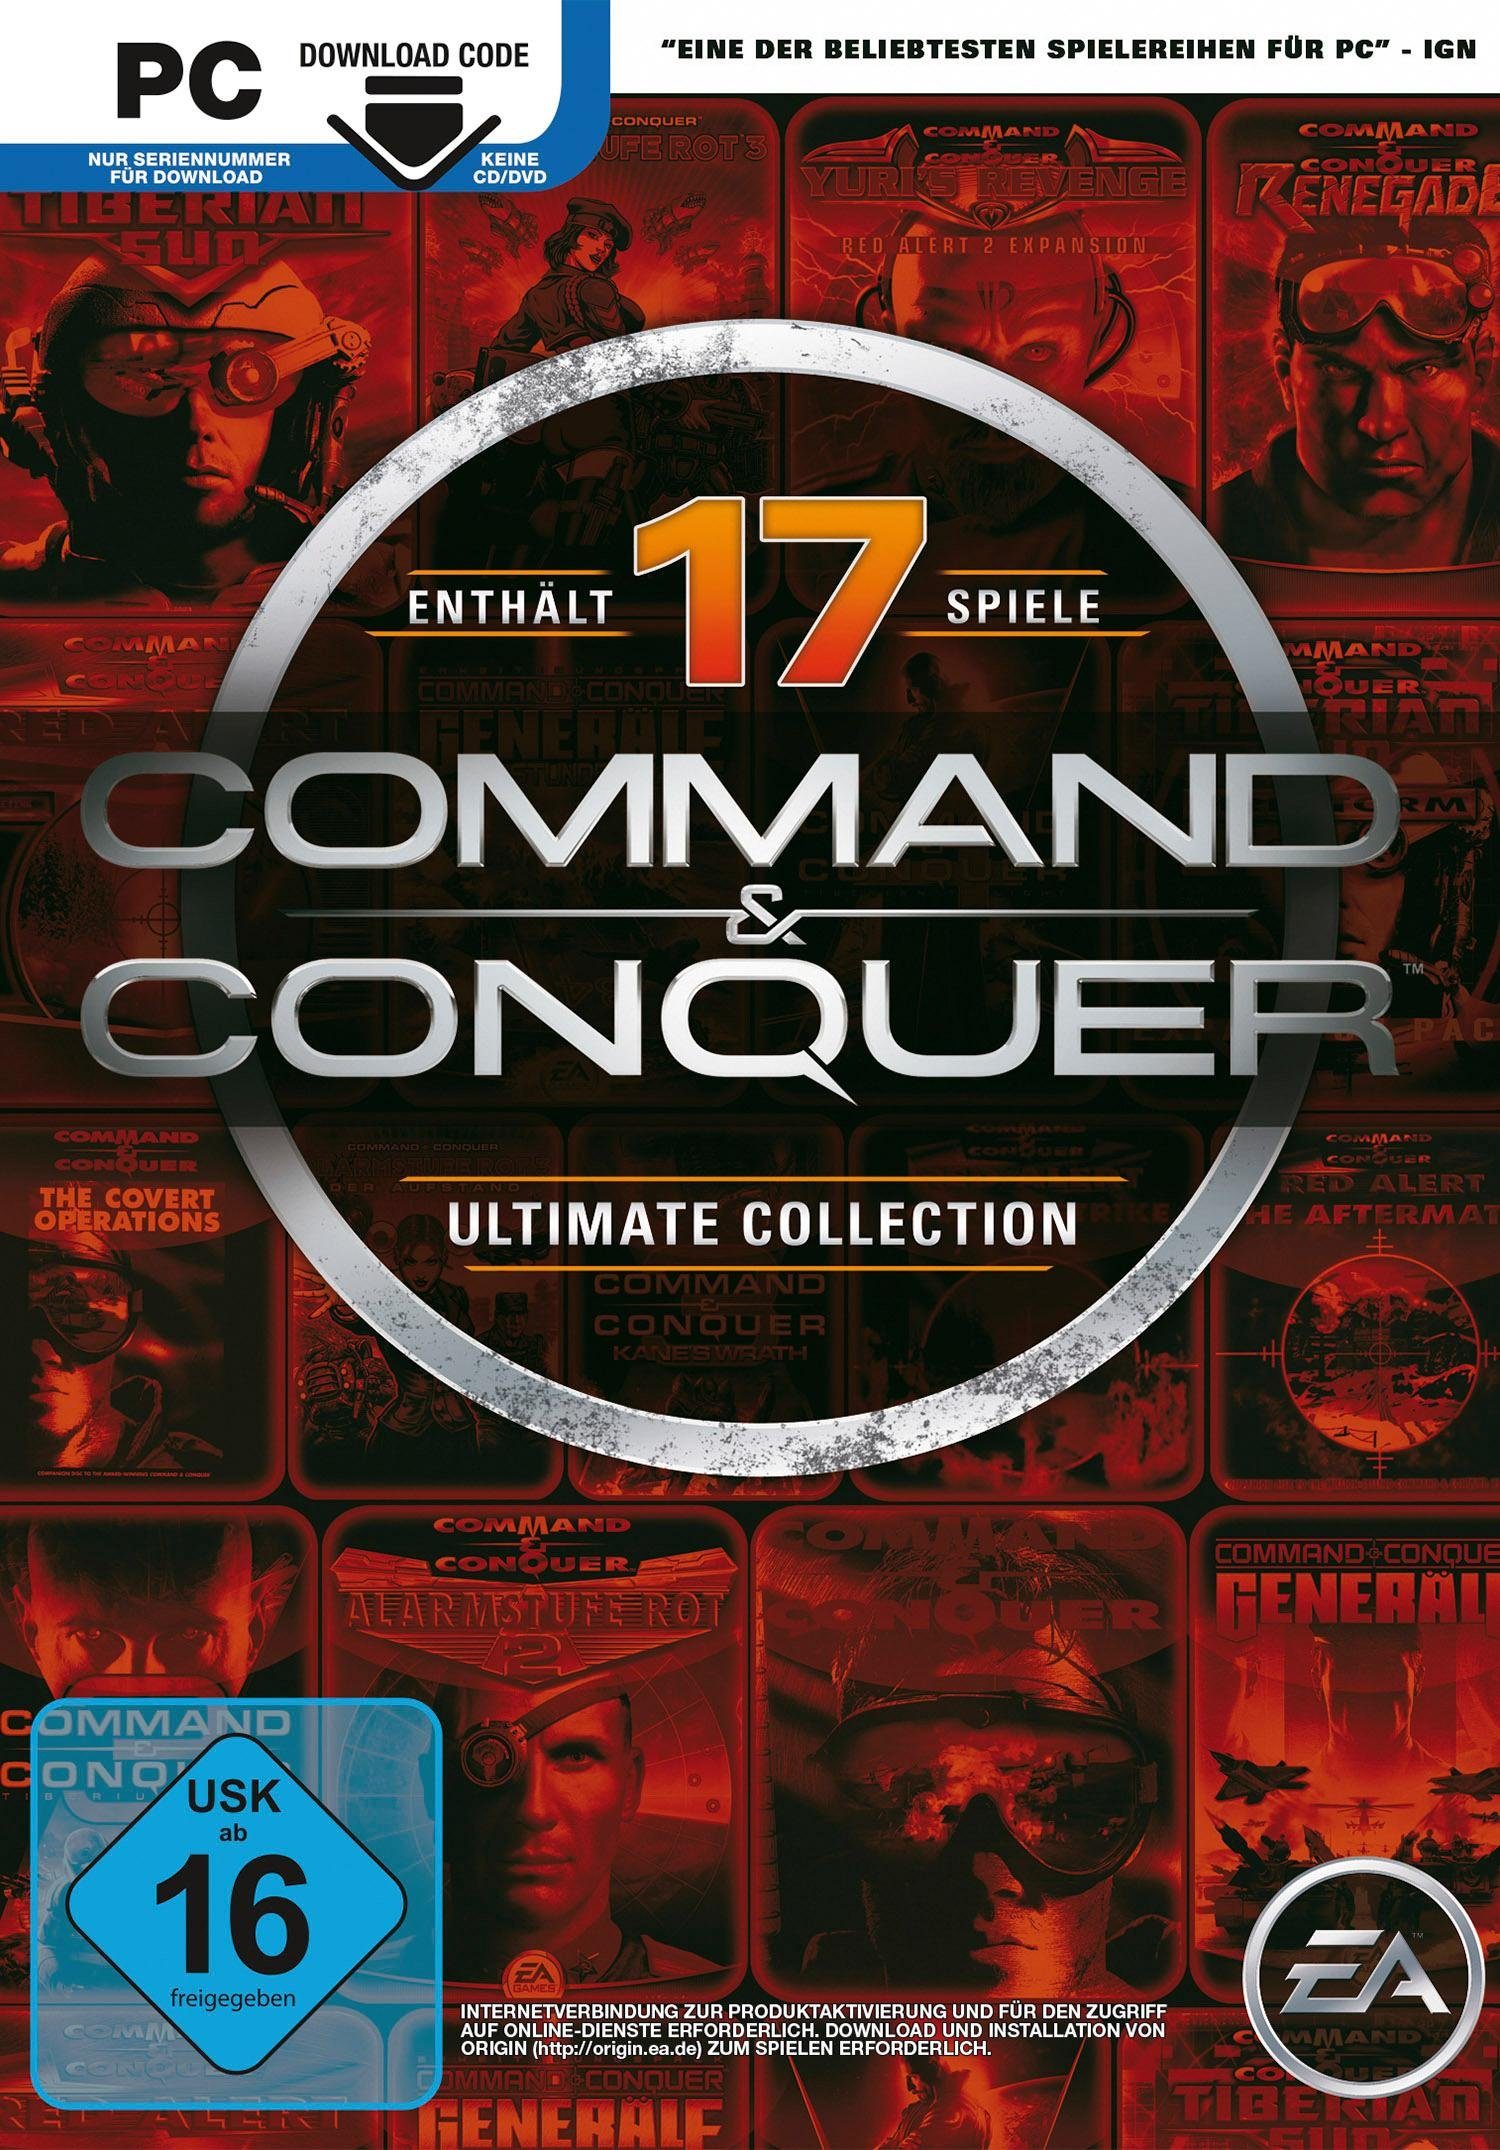 Pyramide Command Electronic & Collection Arts Ultimate PC, Software Conquer: